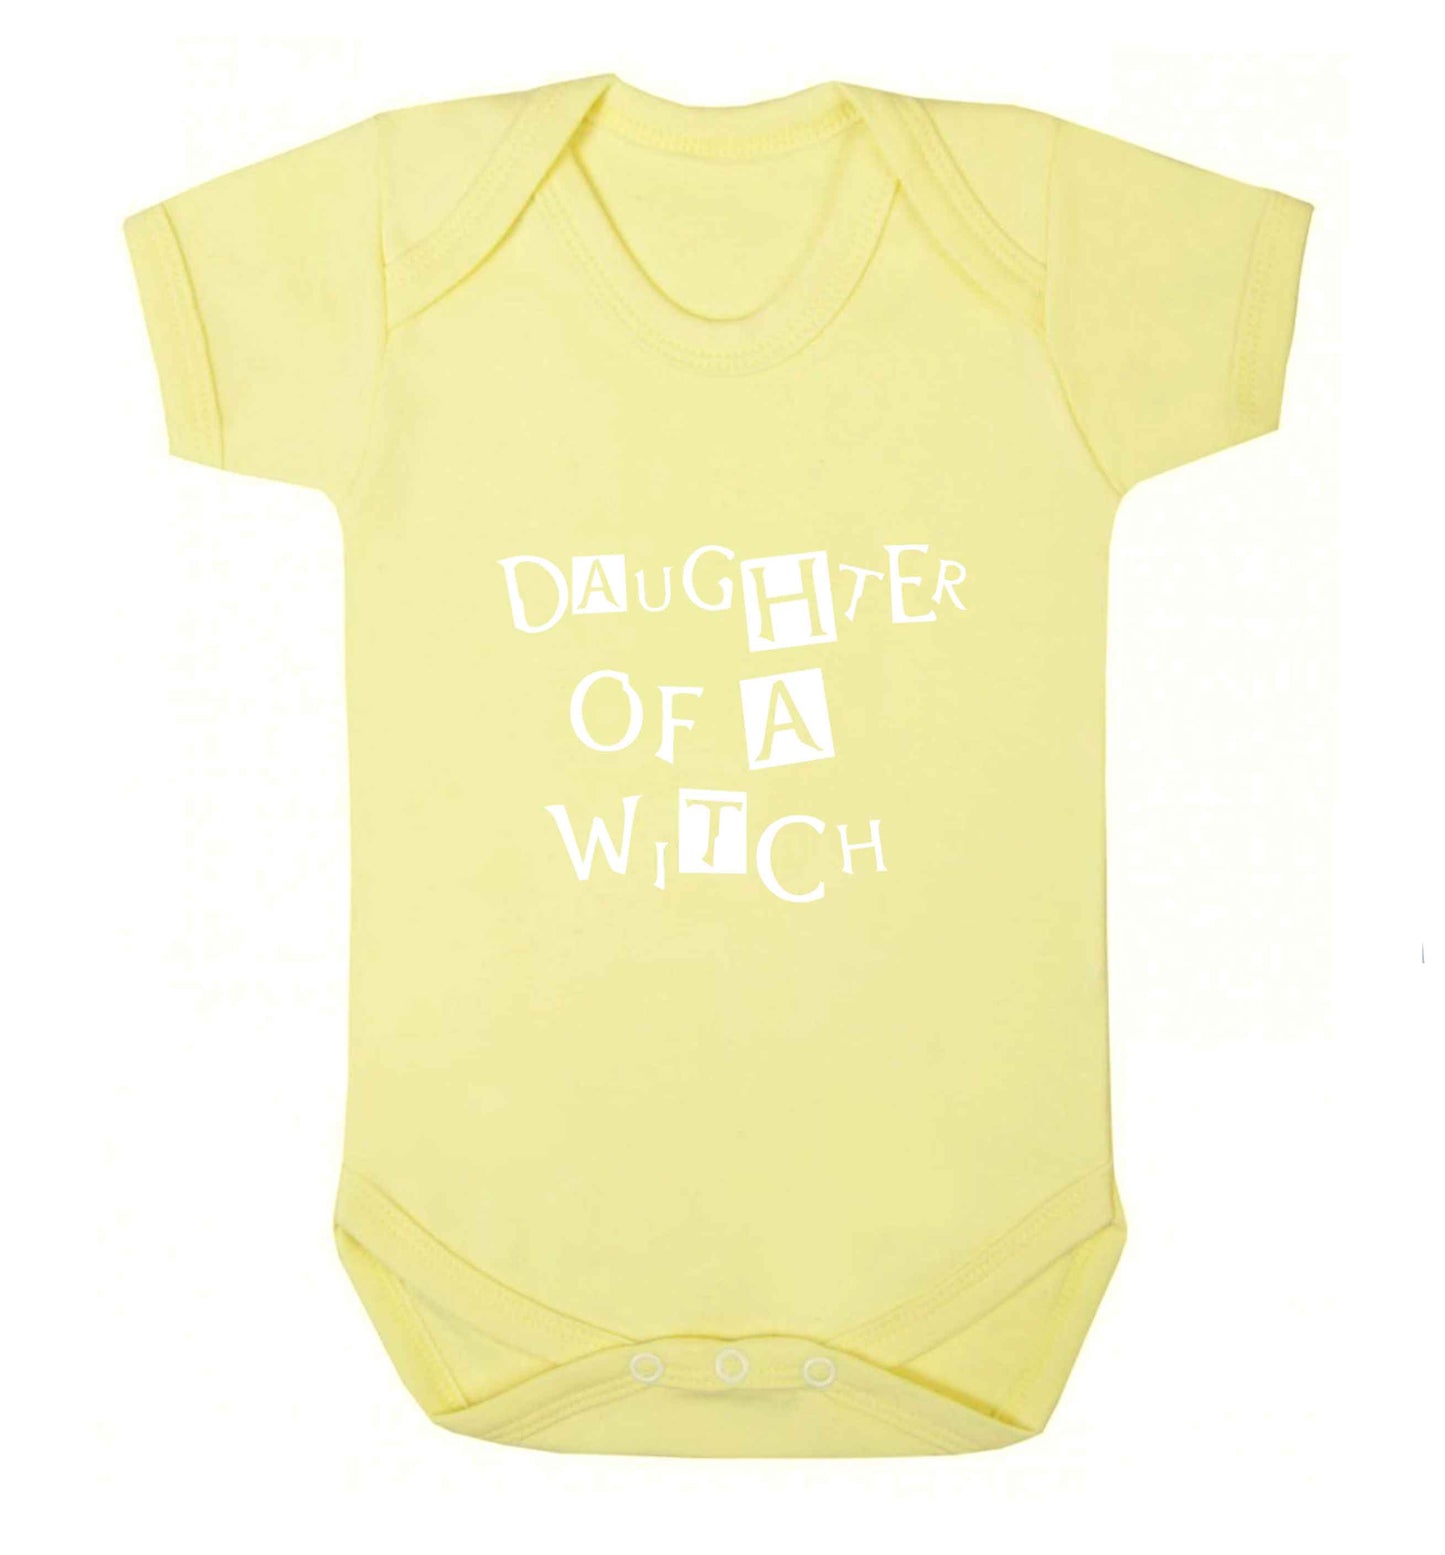 Daughter of a witch baby vest pale yellow 18-24 months